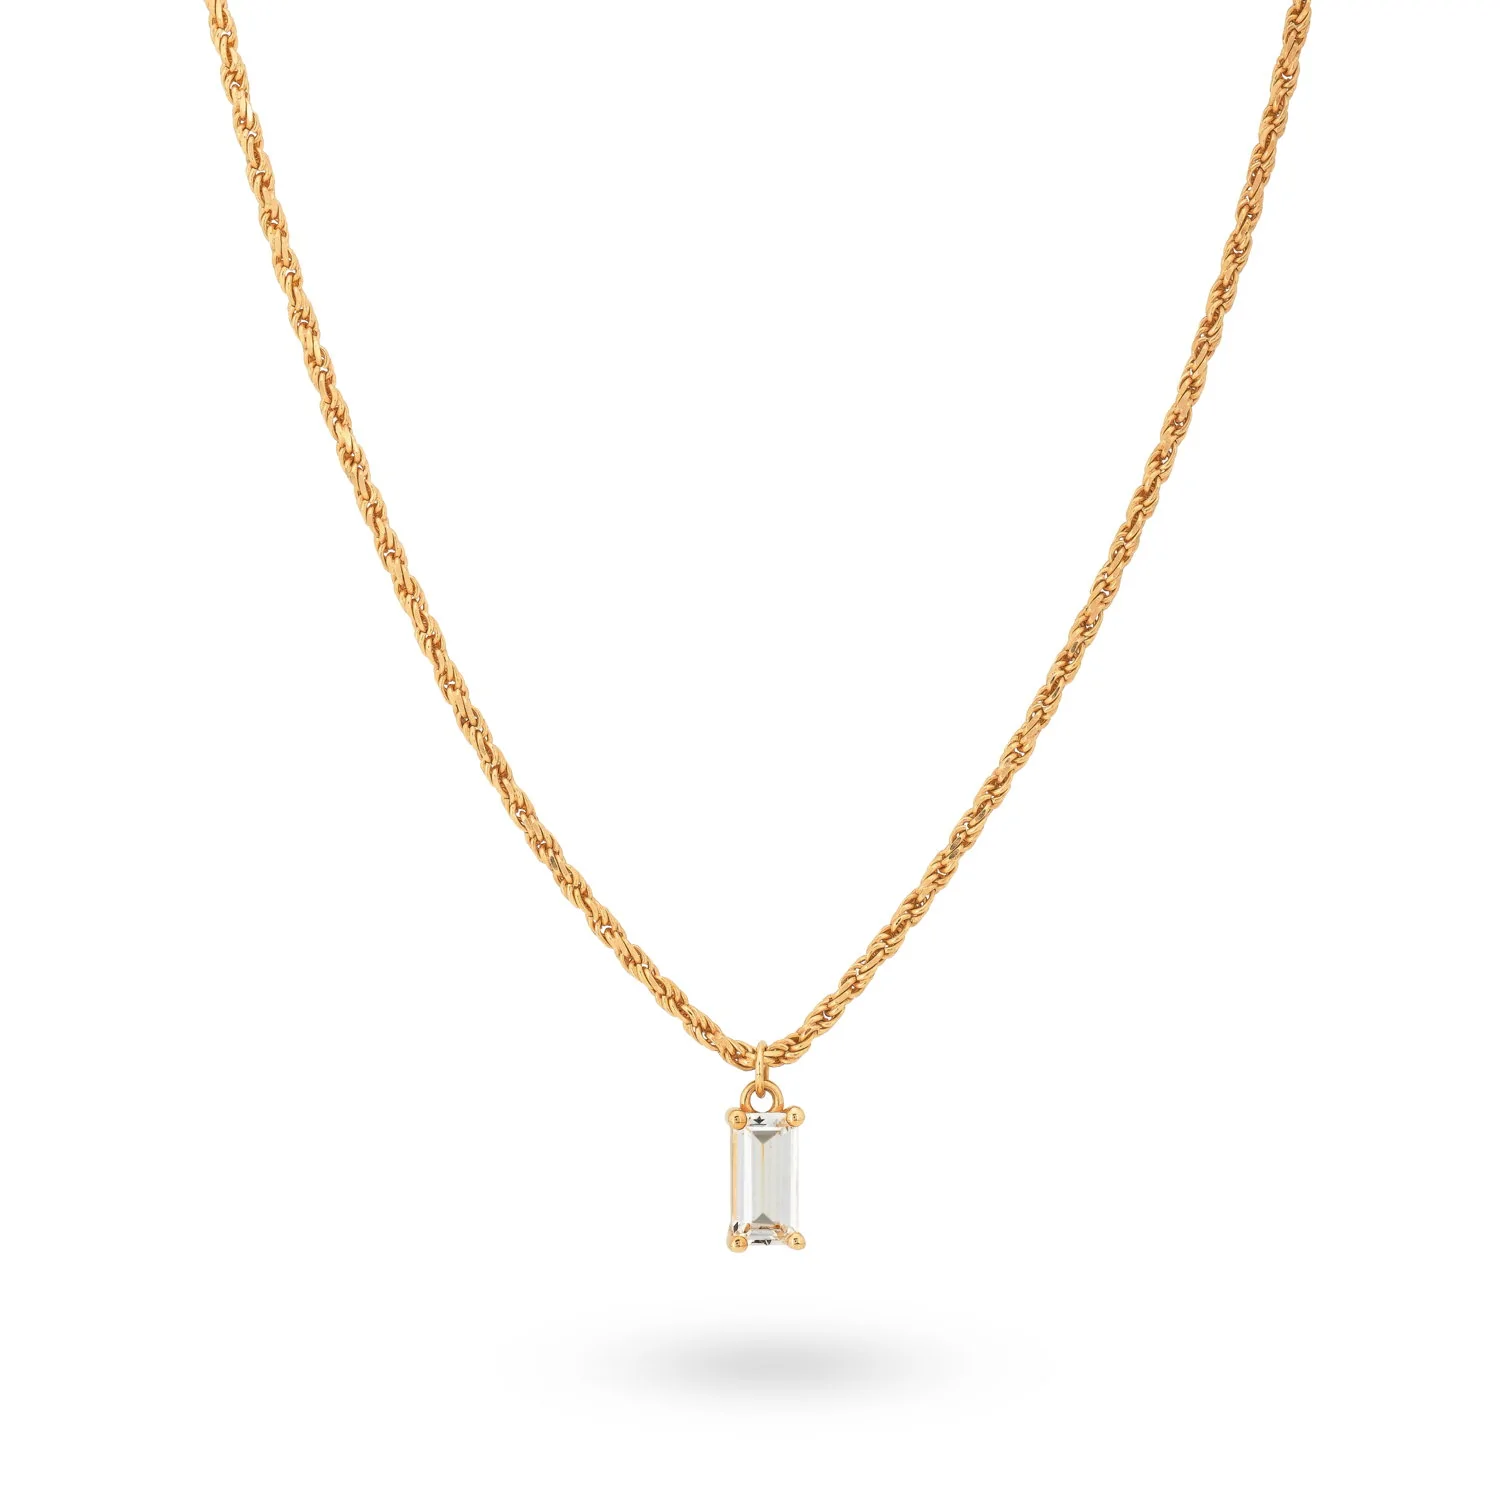 24Kae Gold Rope Chain Necklace with Clear Stone Pendant